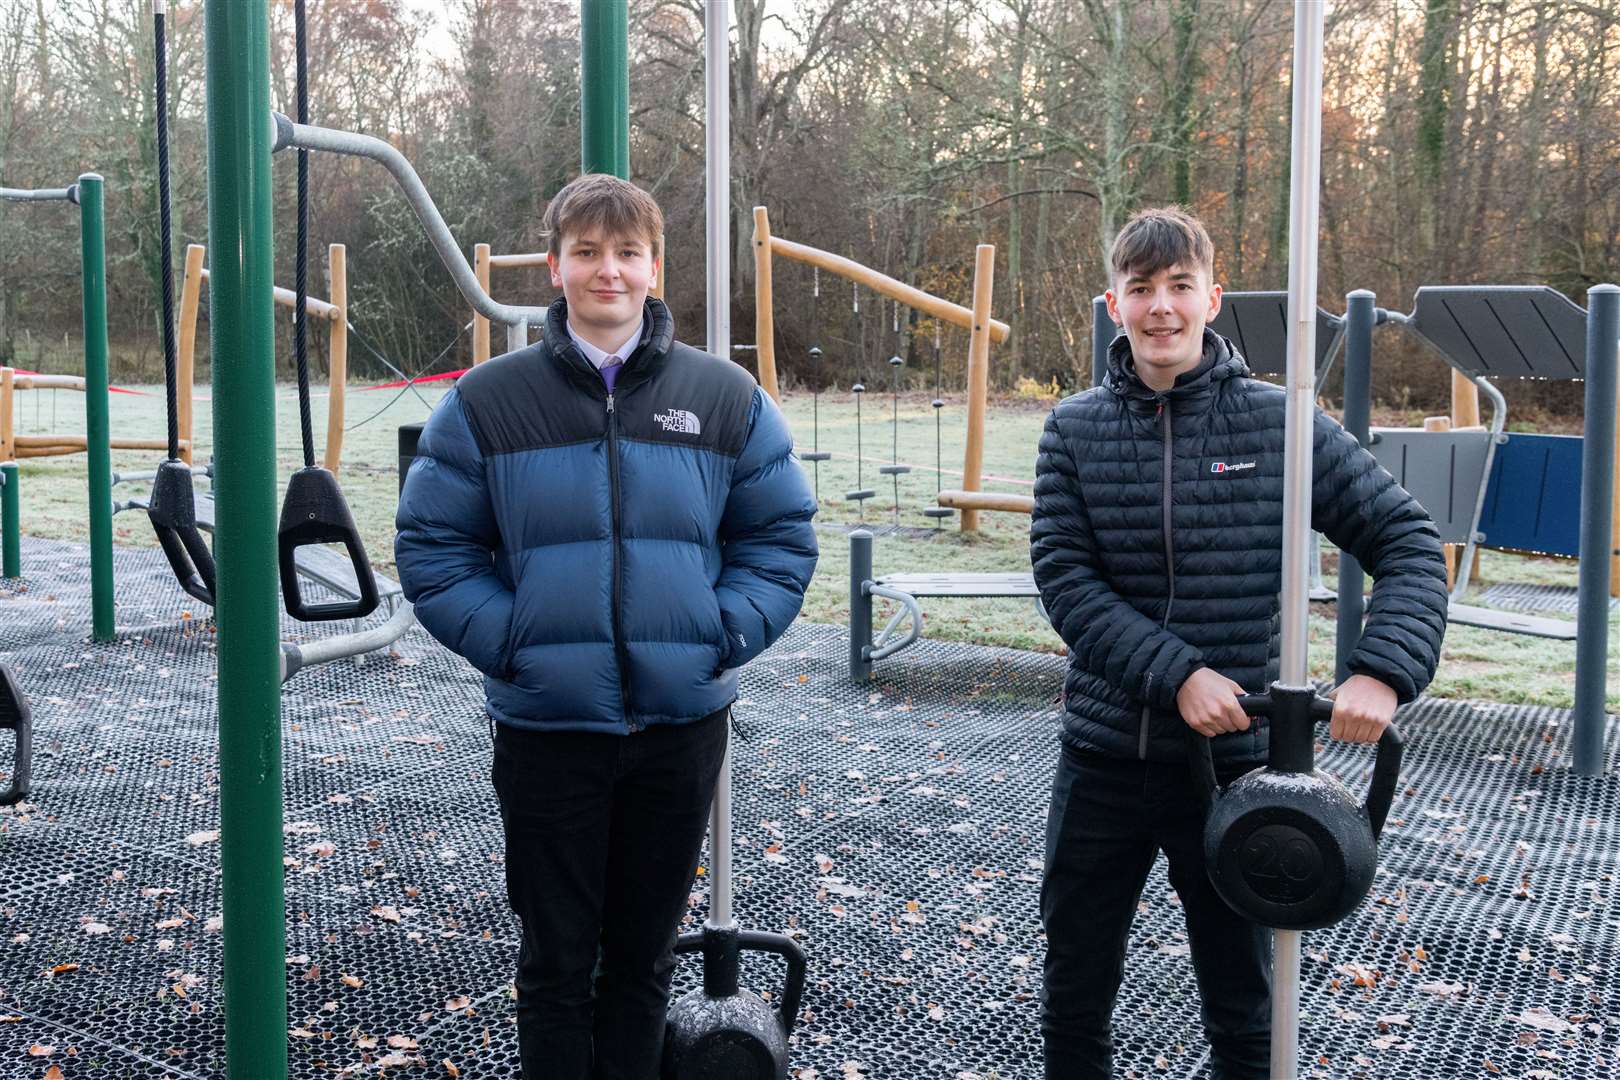 Josh Angell and Lewis Mackenzie at the official opening of the community outdoor gym.